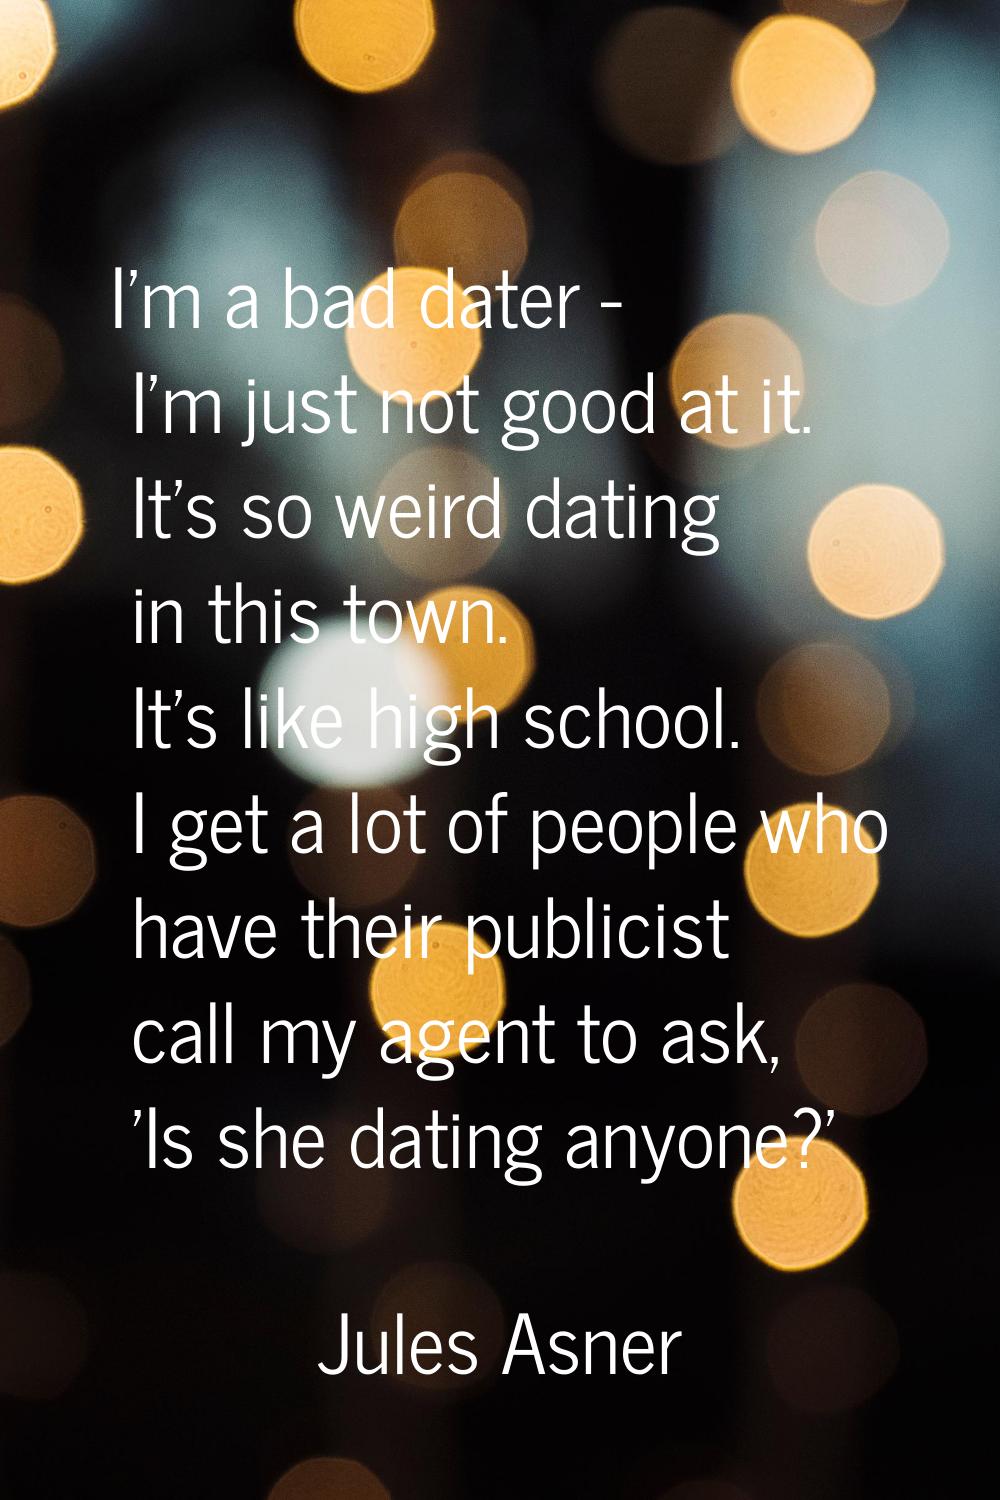 I'm a bad dater - I'm just not good at it. It's so weird dating in this town. It's like high school